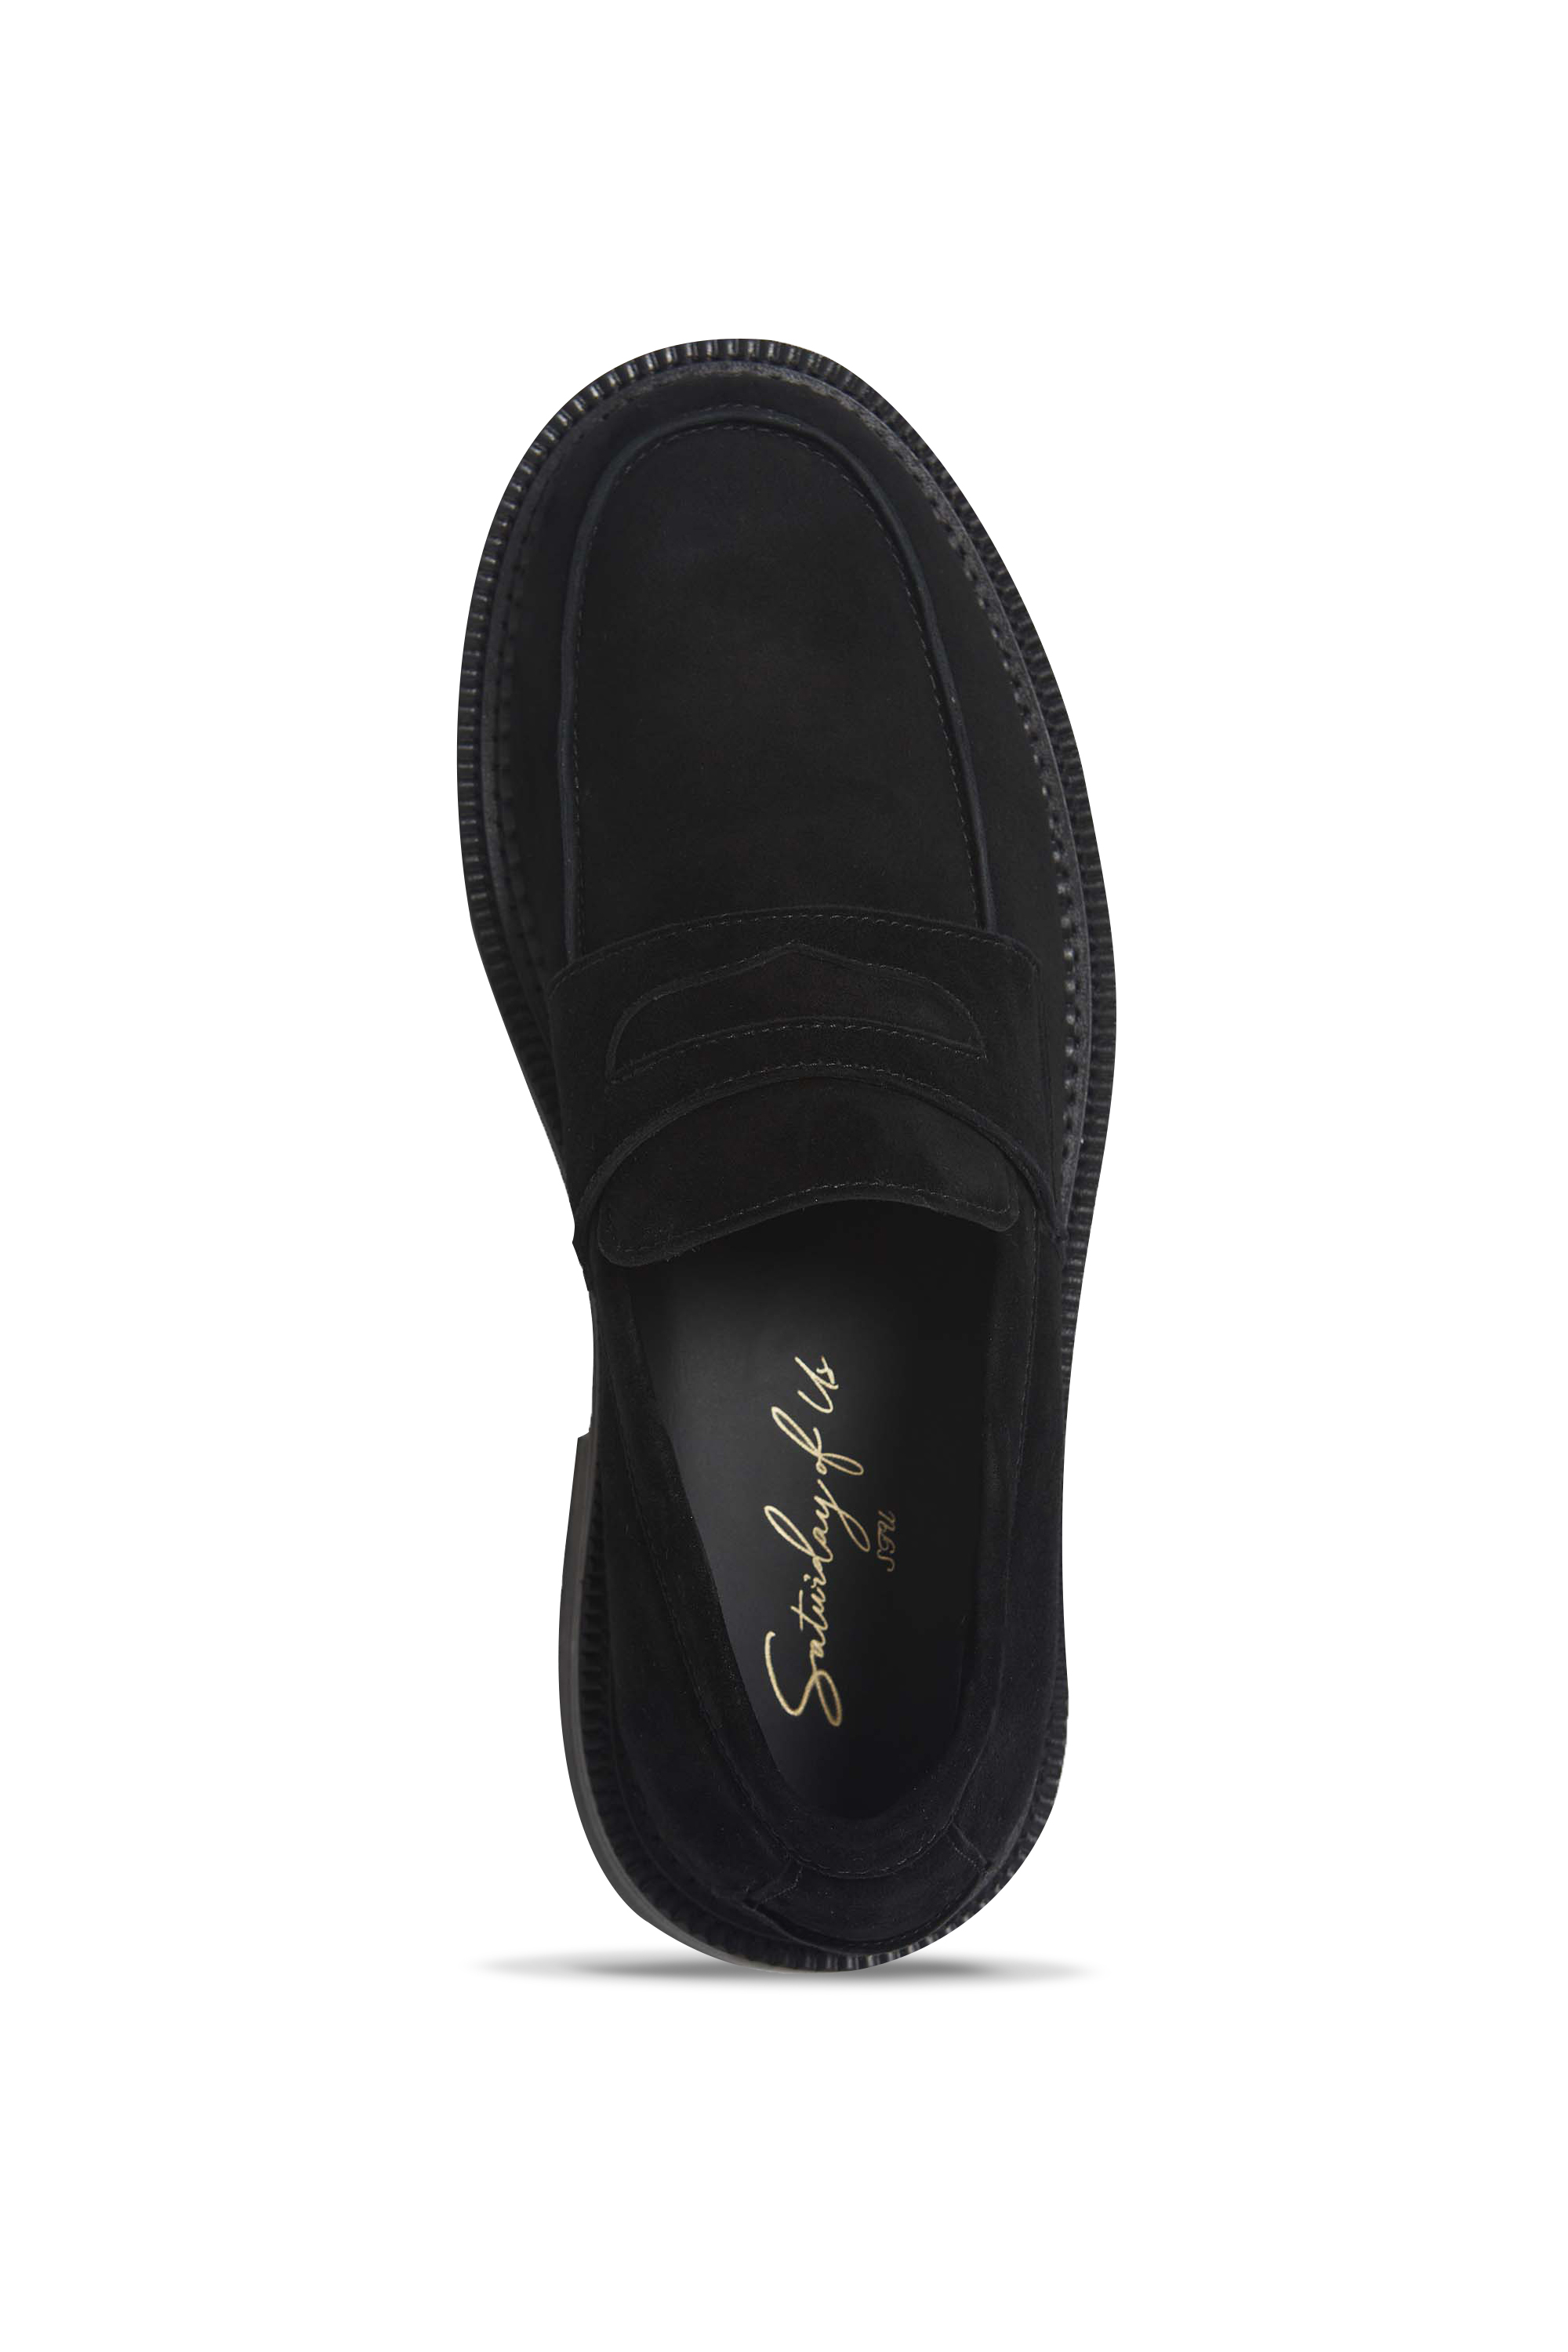 Suede Penny Loafers  Black